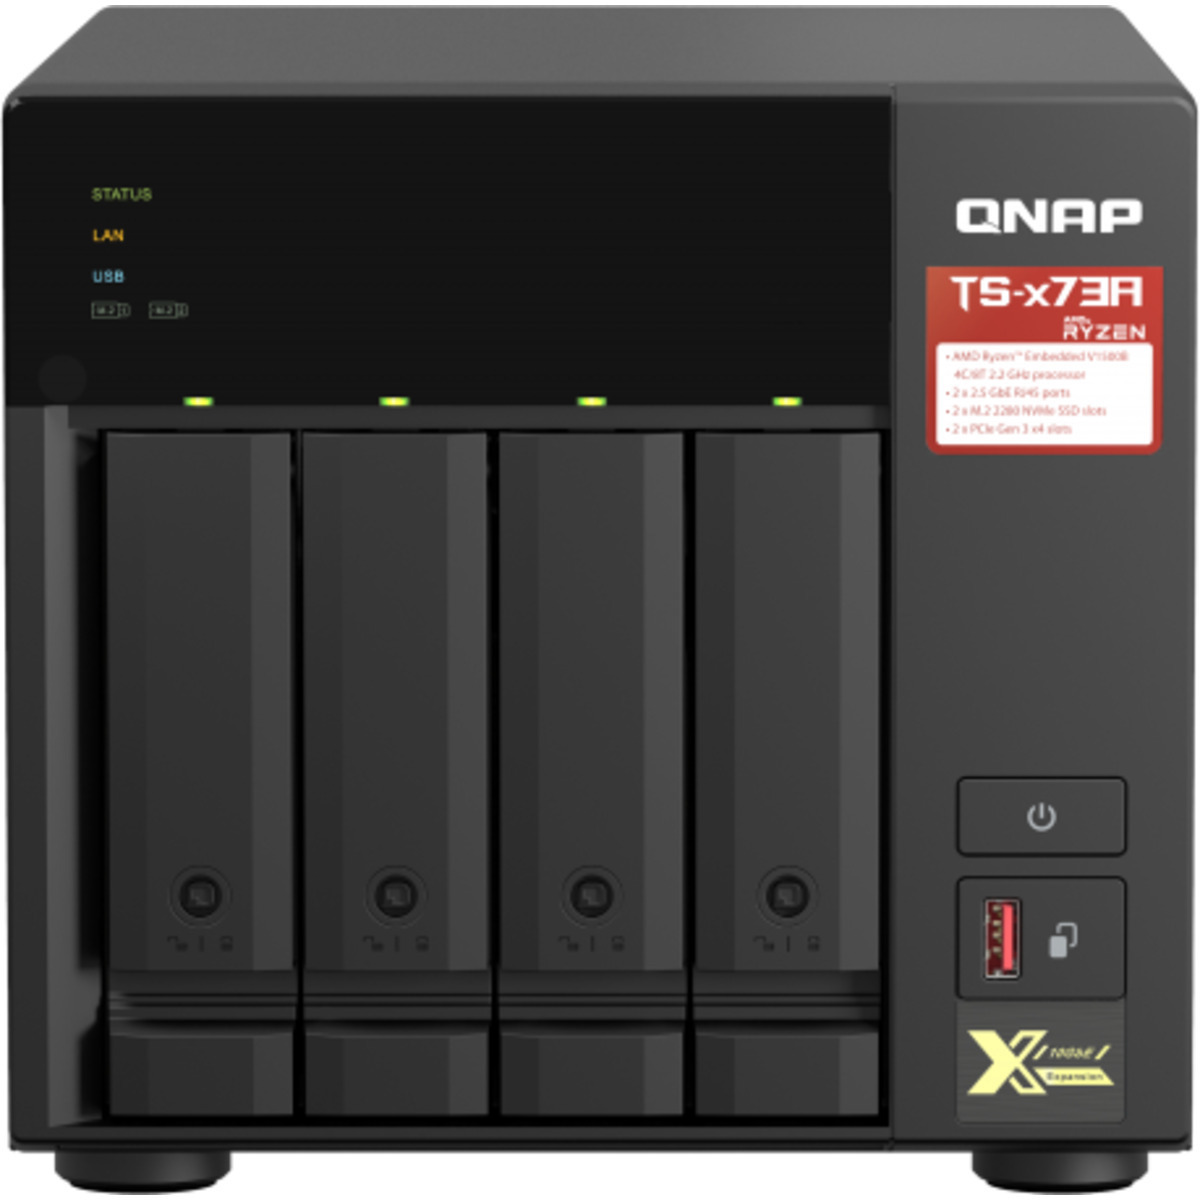 QNAP TS-473A 96tb 4-Bay Desktop Multimedia / Power User / Business NAS - Network Attached Storage Device 4x24tb Seagate IronWolf Pro ST24000NT002 3.5 7200rpm SATA 6Gb/s HDD NAS Class Drives Installed - Burn-In Tested TS-473A